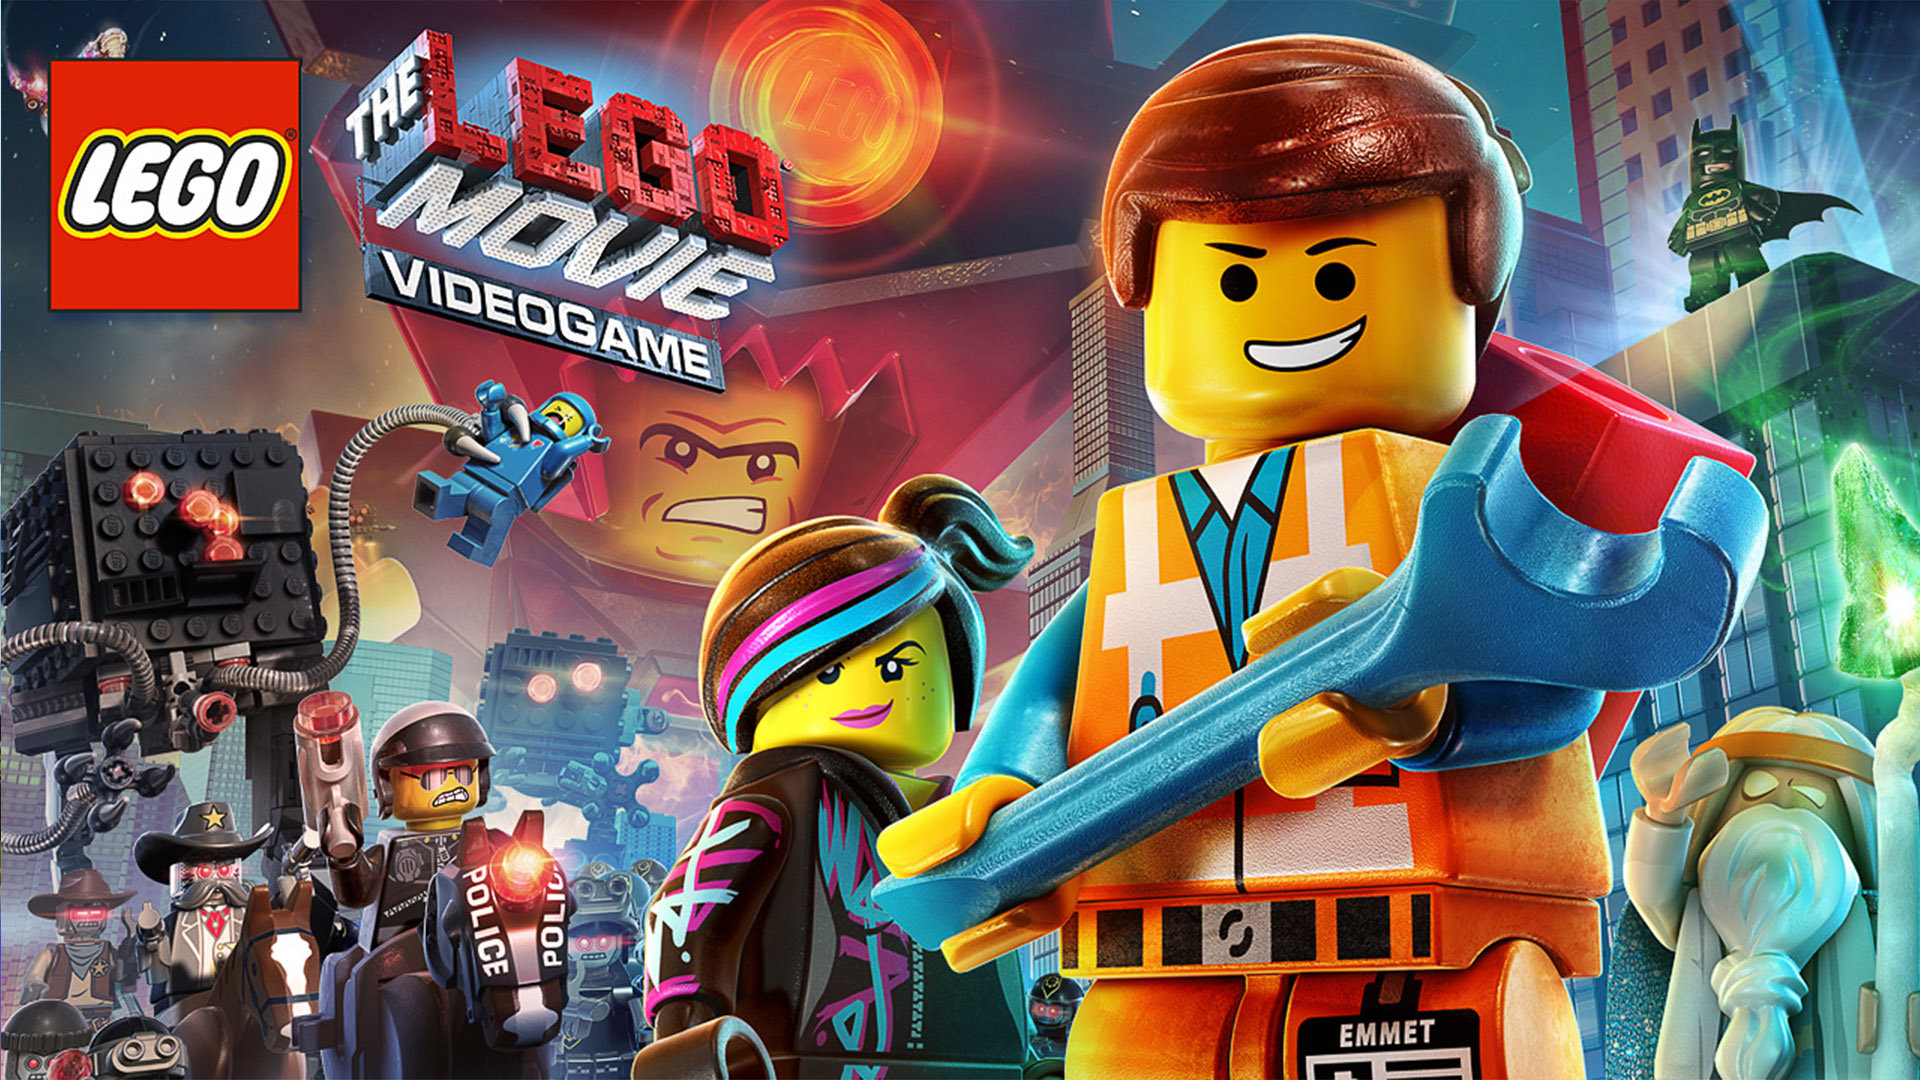 Download 1080p The LEGO Movie Videogame PC background ID:233204 for free